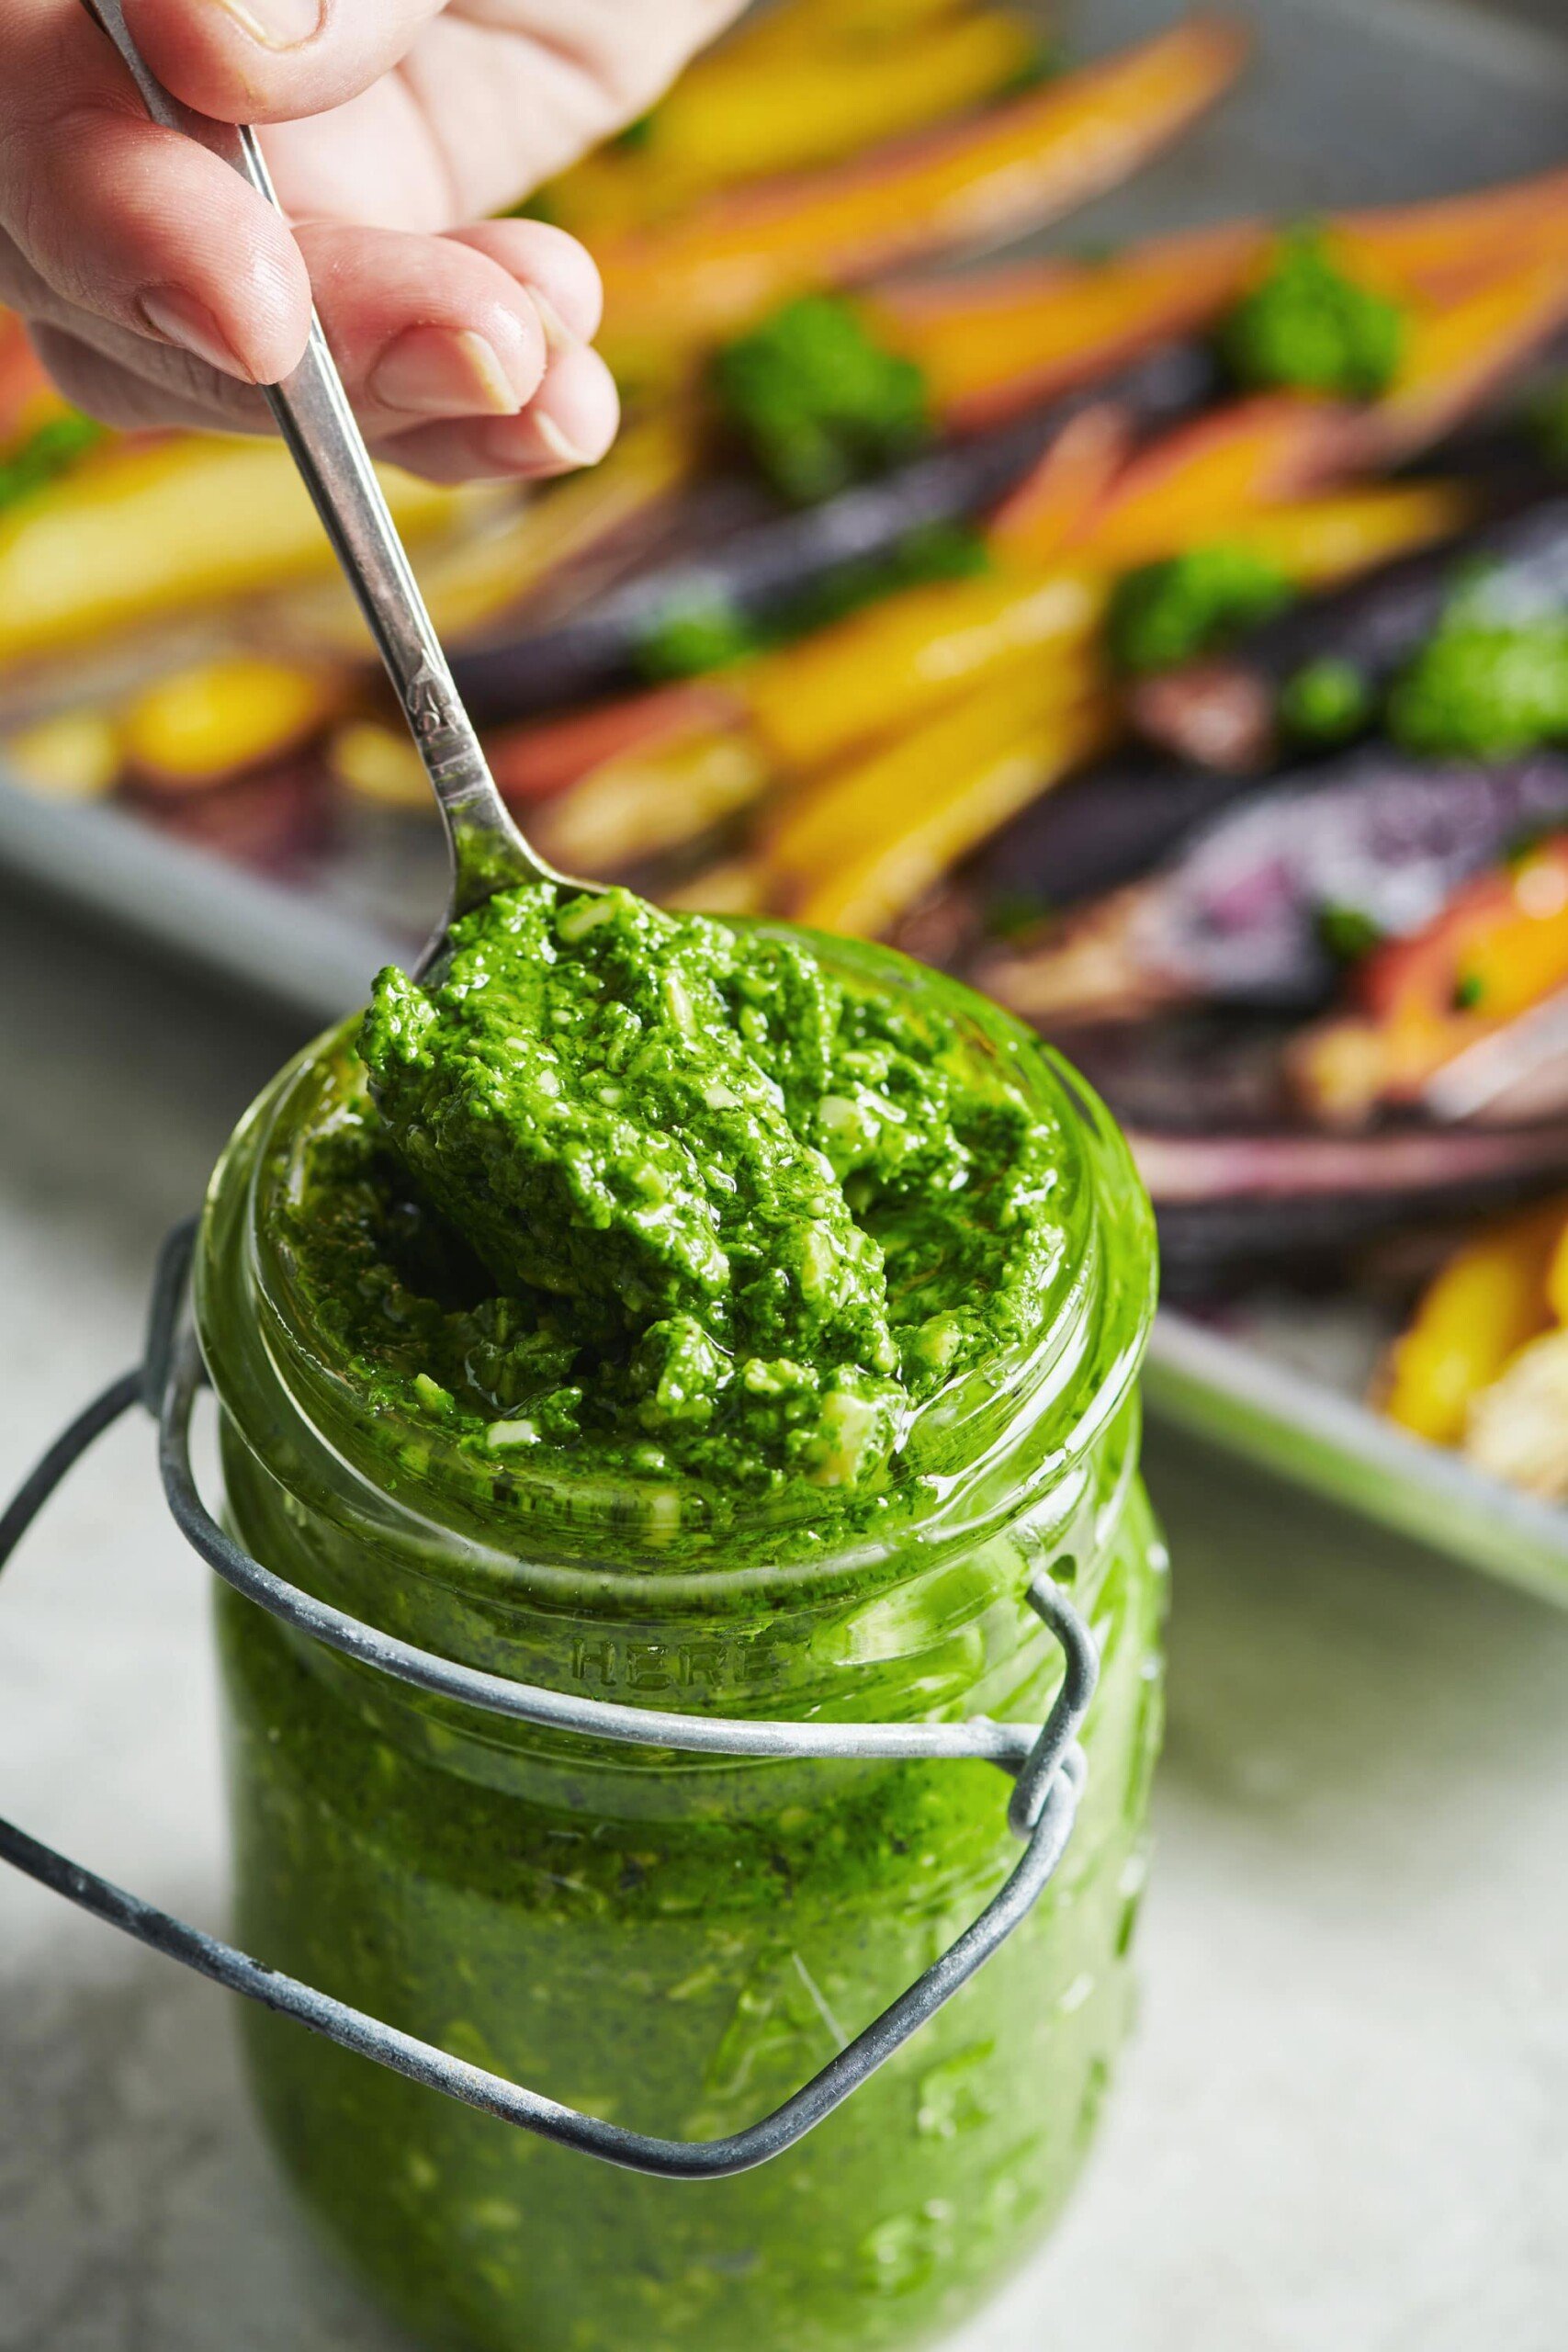 Serving Spinach Parsley Pesto from glass jar.